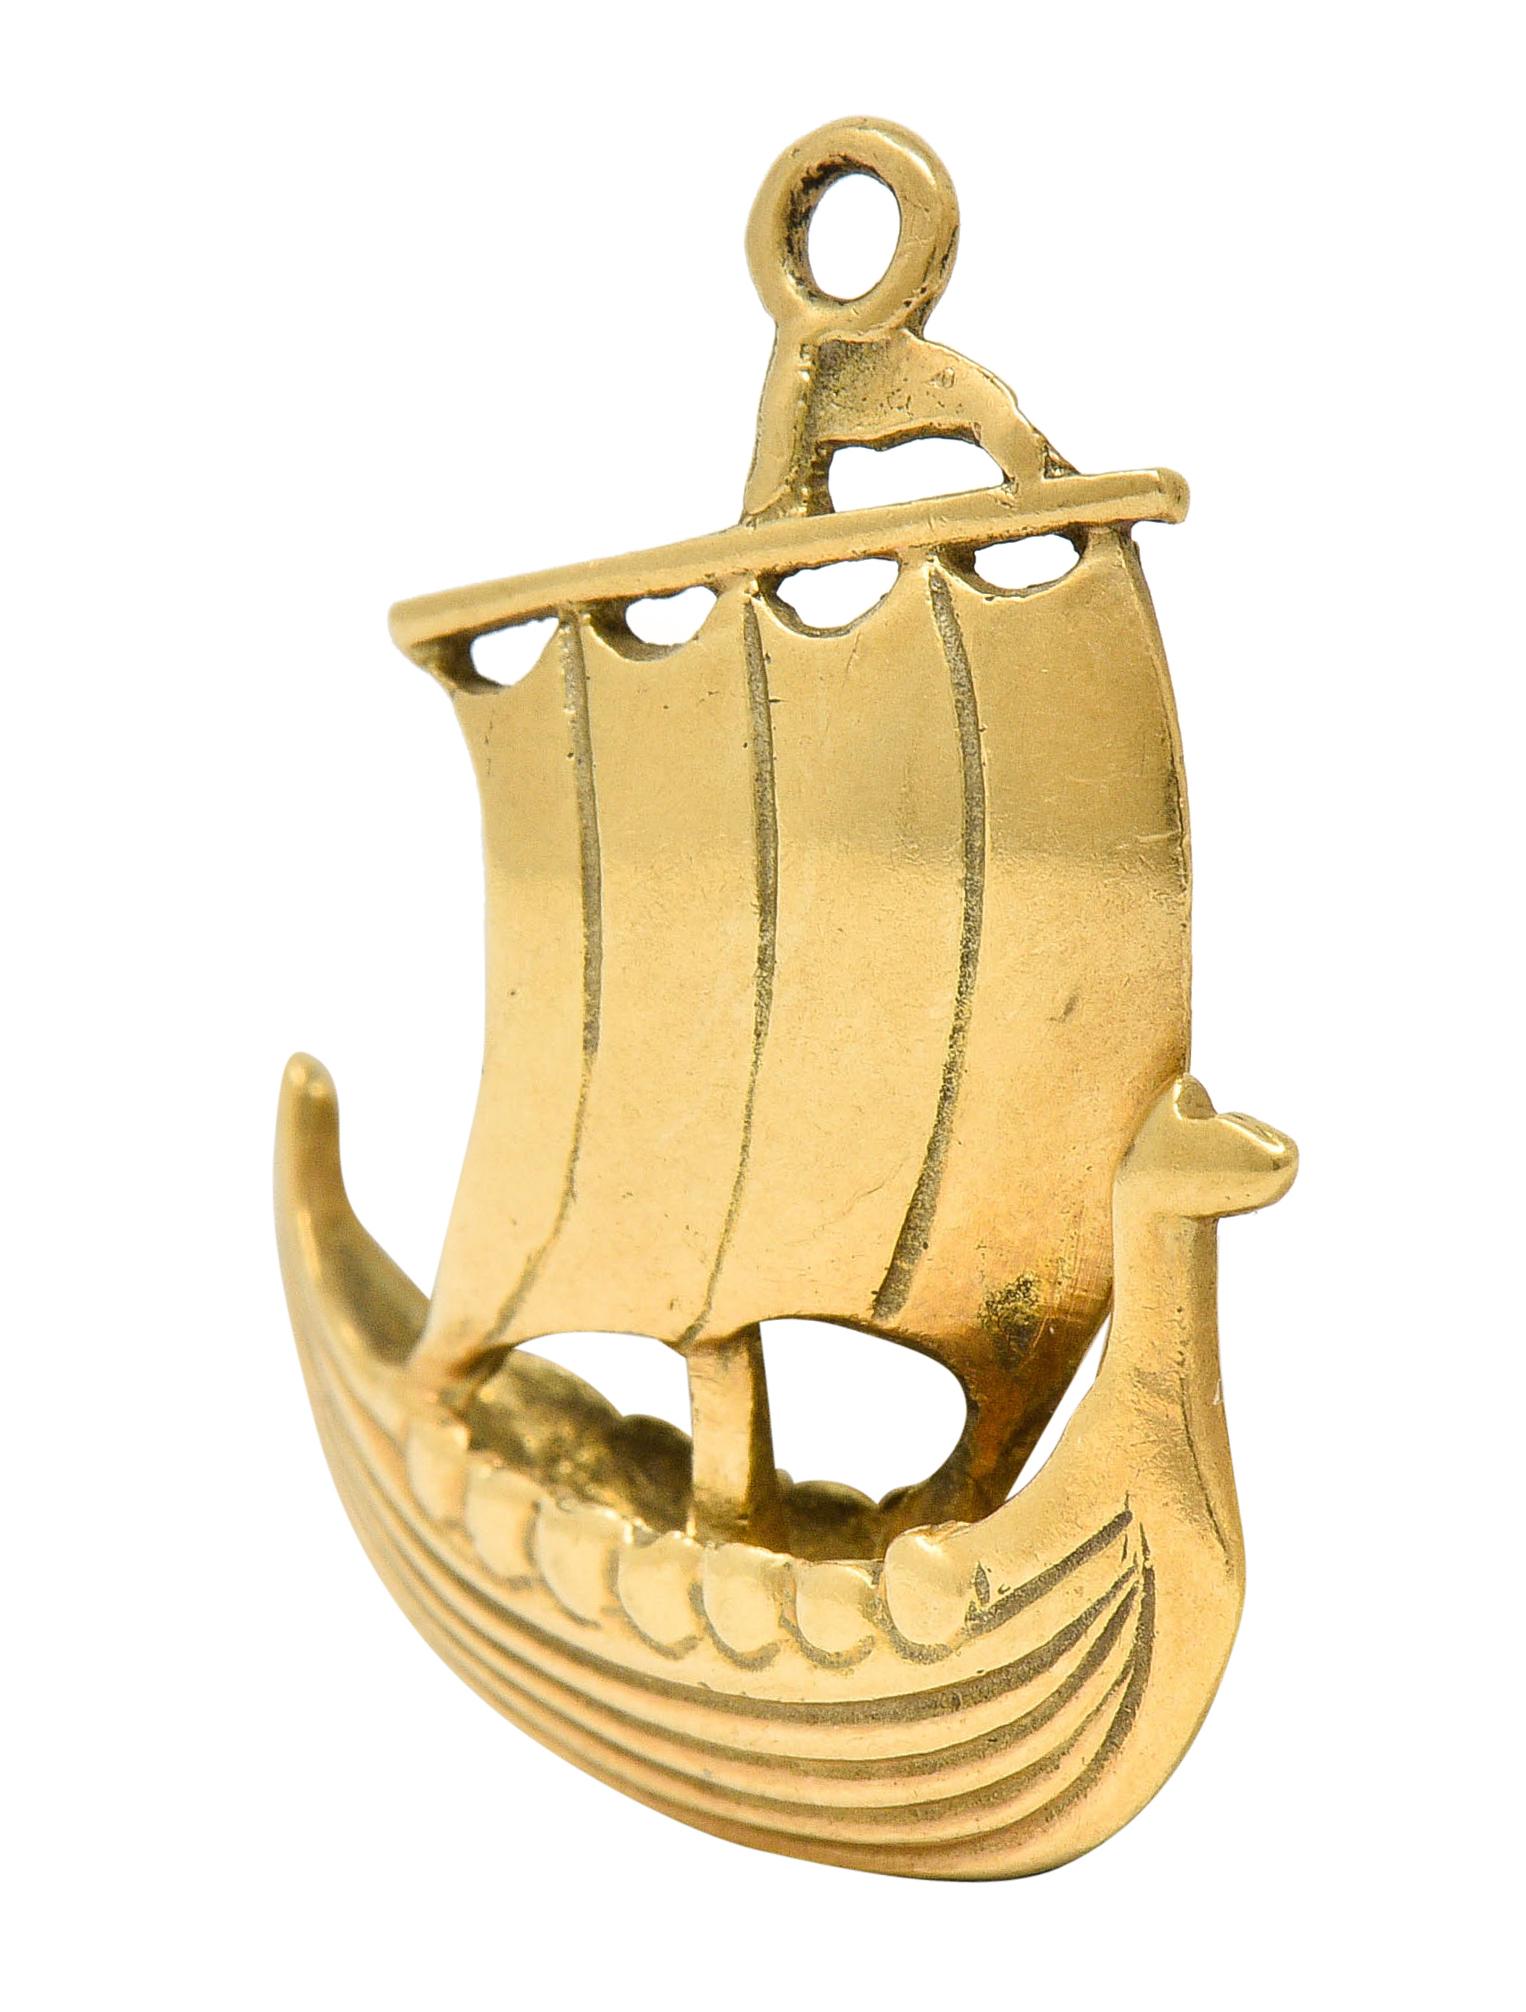 Designed as a stylized Viking longboat

With a billowing sail and ribbed texture

Maker's mark and stamped for 14 karat gold

Circa: 1905

Measures: 3/4 x 7/8 inch

Total weight: 2.6 grams

Gliding. Sailing. Pioneer.
 

Stock Number: We-5365